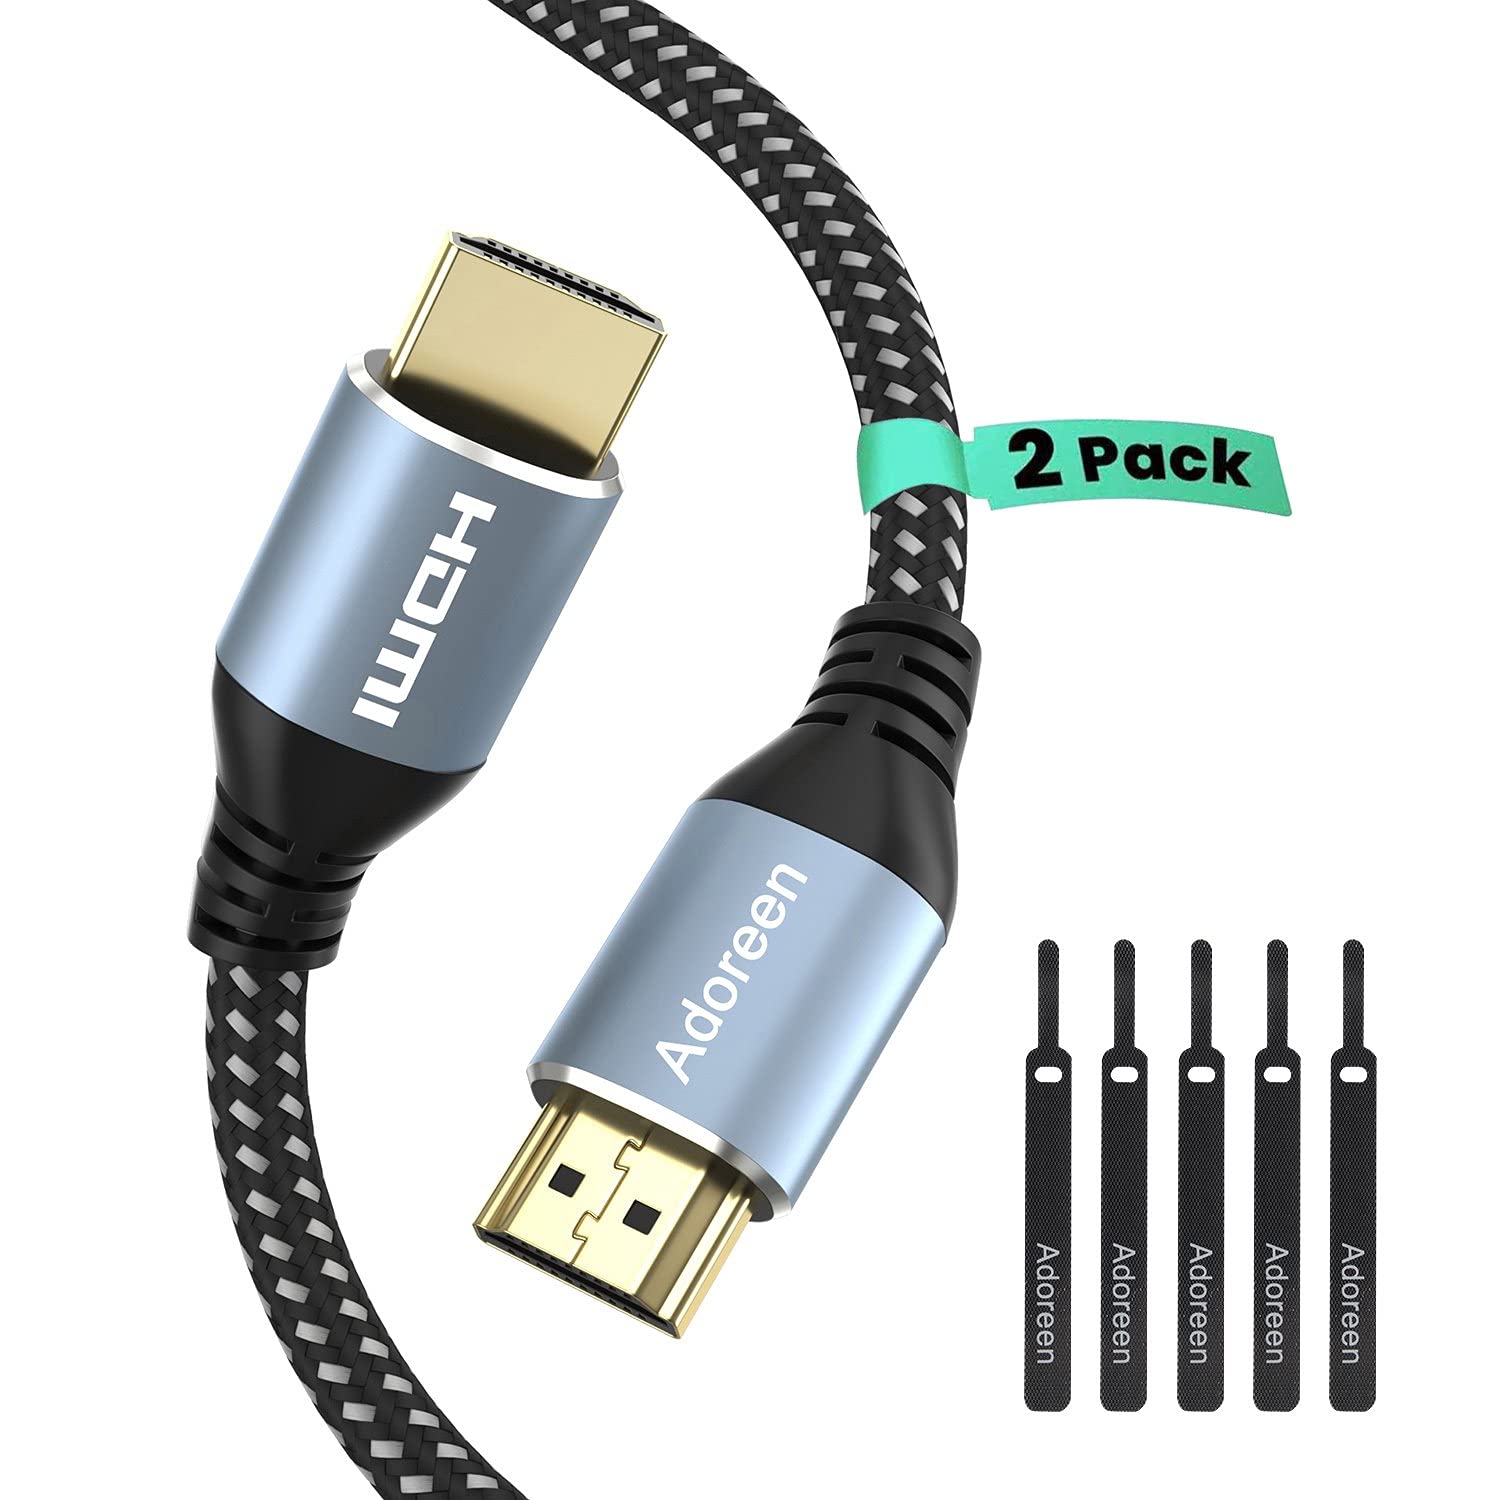 Adoreen 4K HDMI Cable 3 feet/2 Pack, High Speed 18Gbps [...]